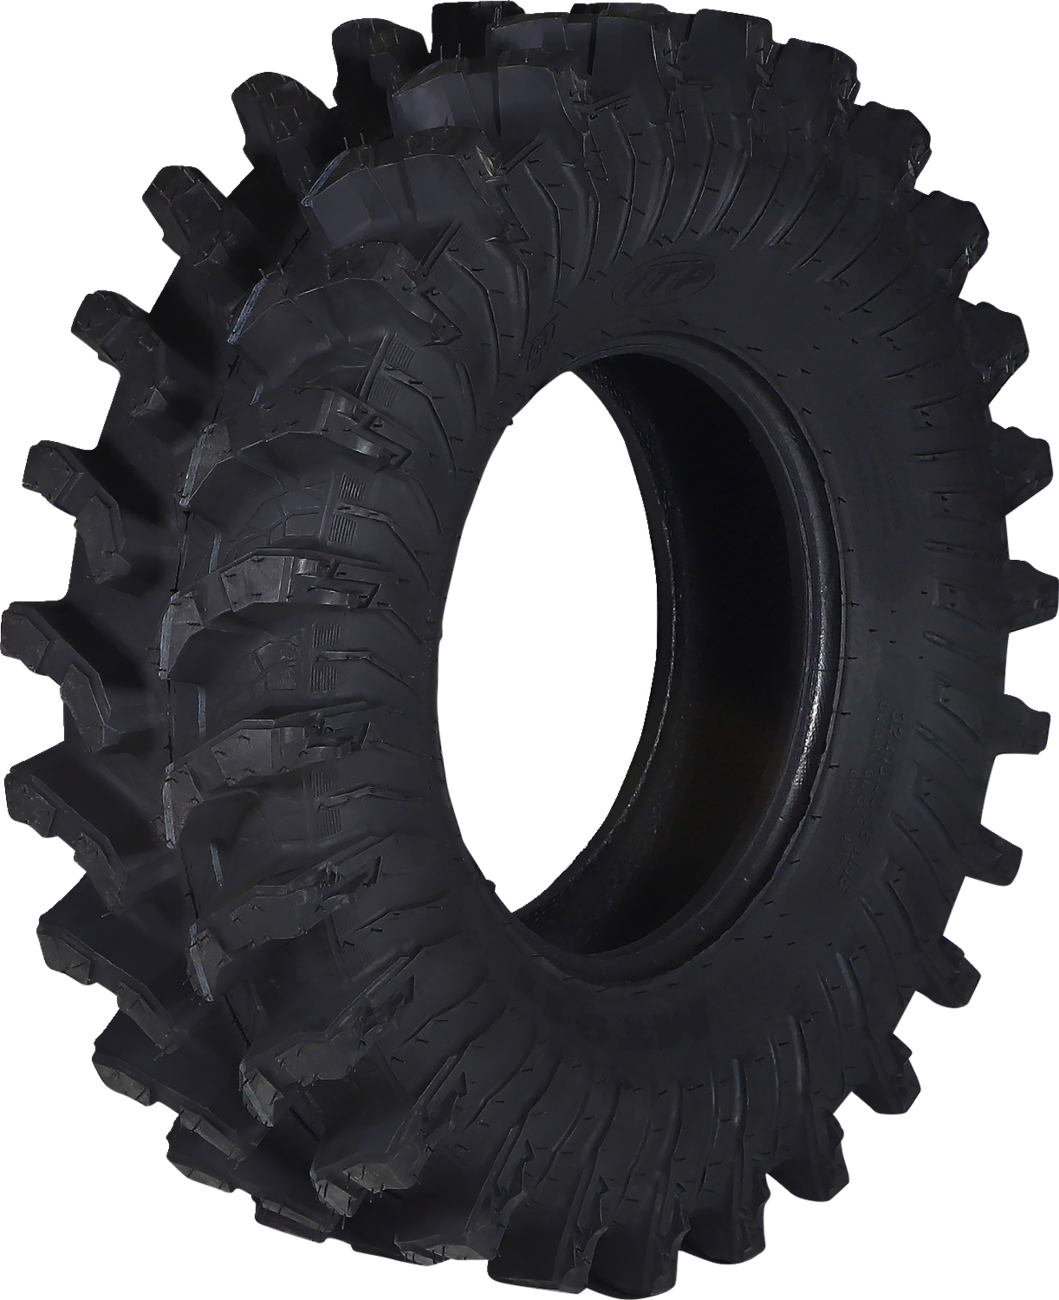 ITP Tire - MT911 - Front/Rear - 27x10-14 - 8 Ply 6P1948